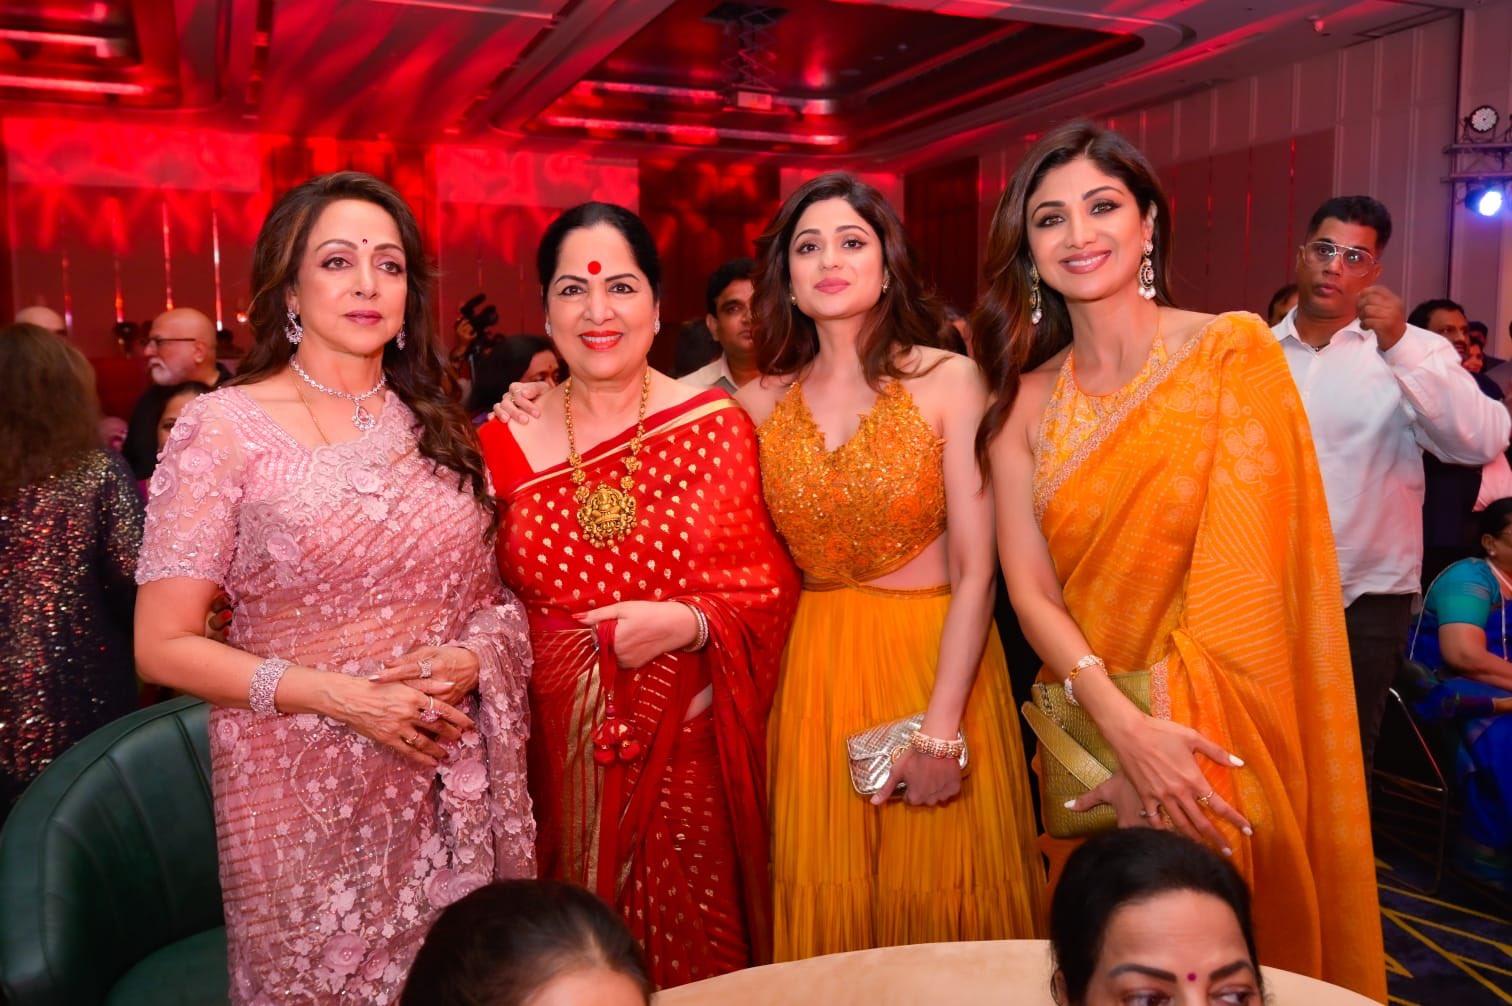 Shilpa, Shamita, and Sunanda Shetty showed up to offer their wishes to Hema Malini. Look at all these beauties in one frame!